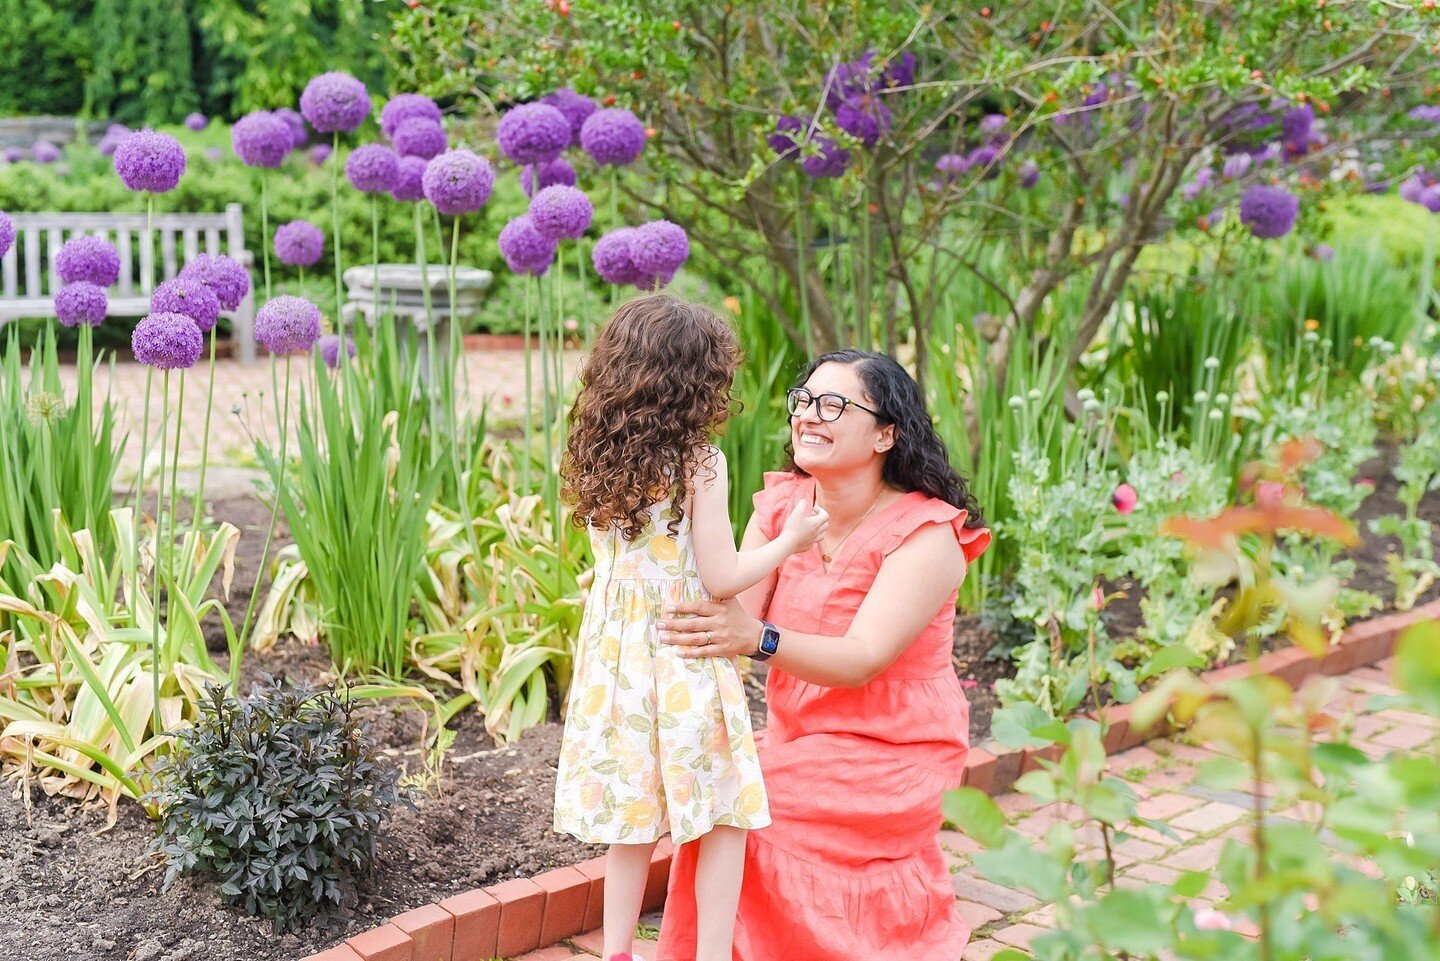 The spring is SO beautiful at this location. Send me a message to schedule your family session! Want to see more from this session? Check out the blog post! https://www.tabithamaeganphoto.com/blog/playful-family-photo-session-in-washington-dc⁣
⁣
#tab